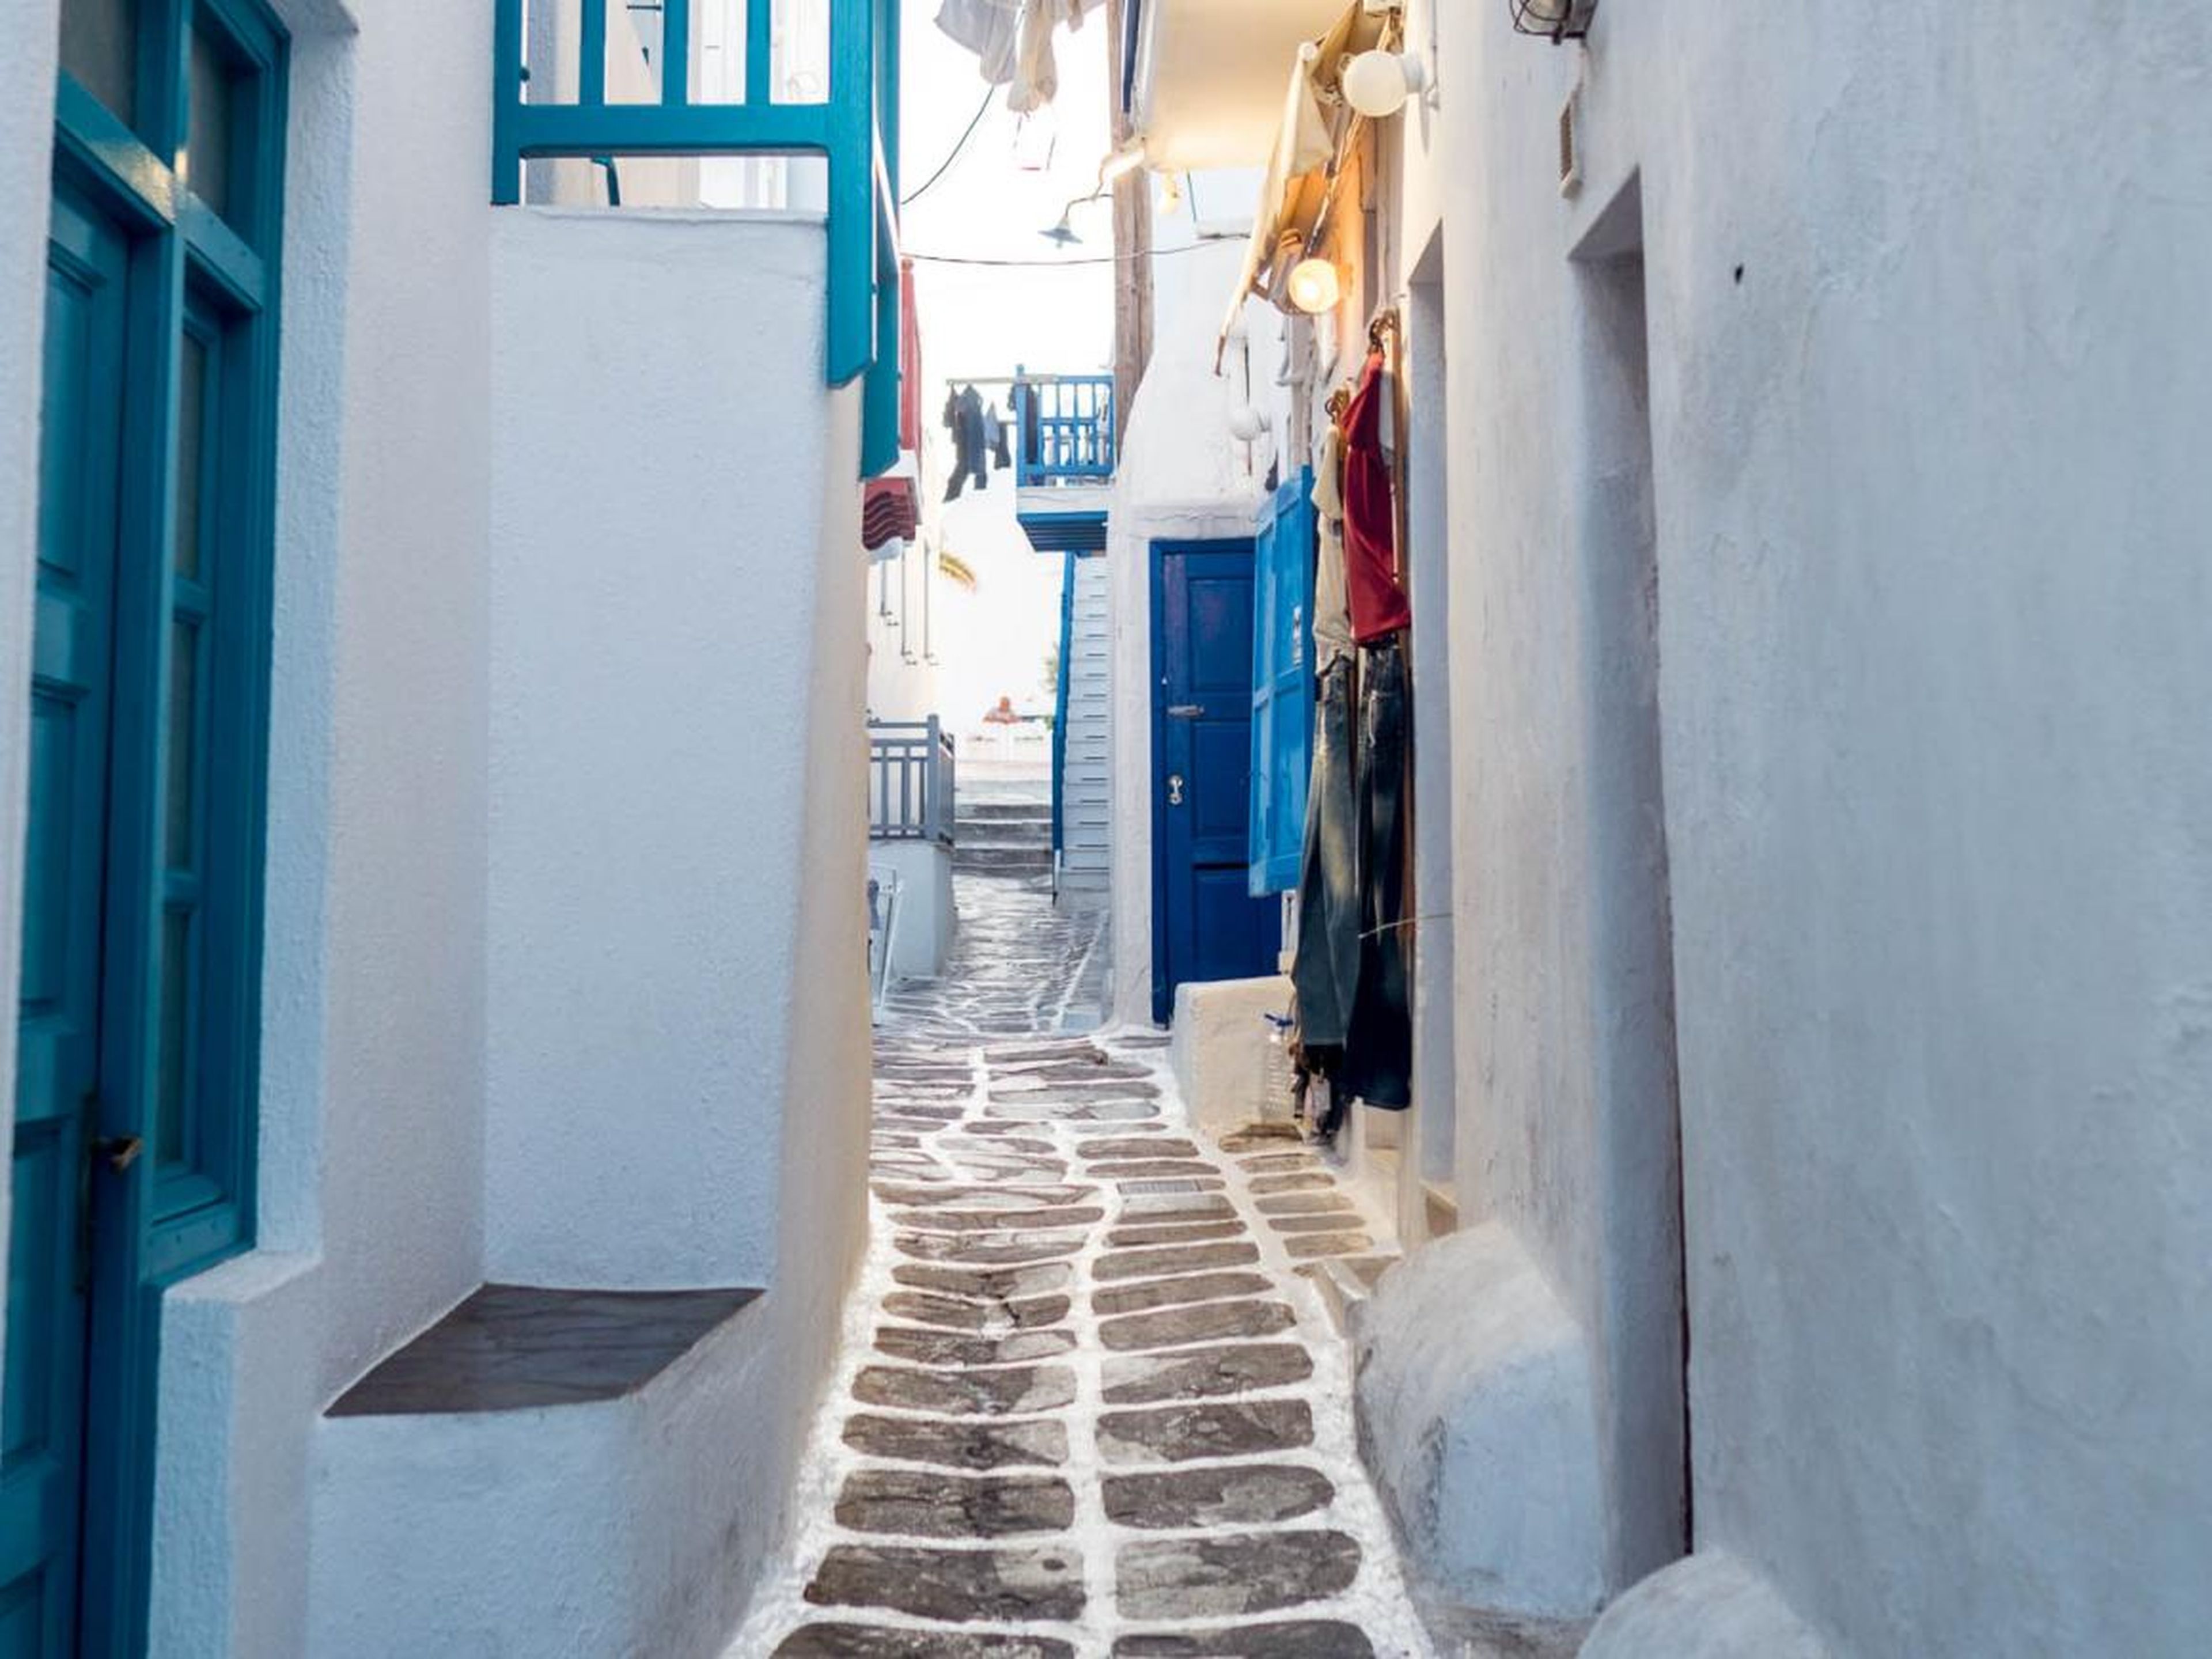 The Hora, with its classic Cycladic architecture, cobblestone streets, and blue and white paint, is the other main sight in Mykonos. The residential streets are dreamy.